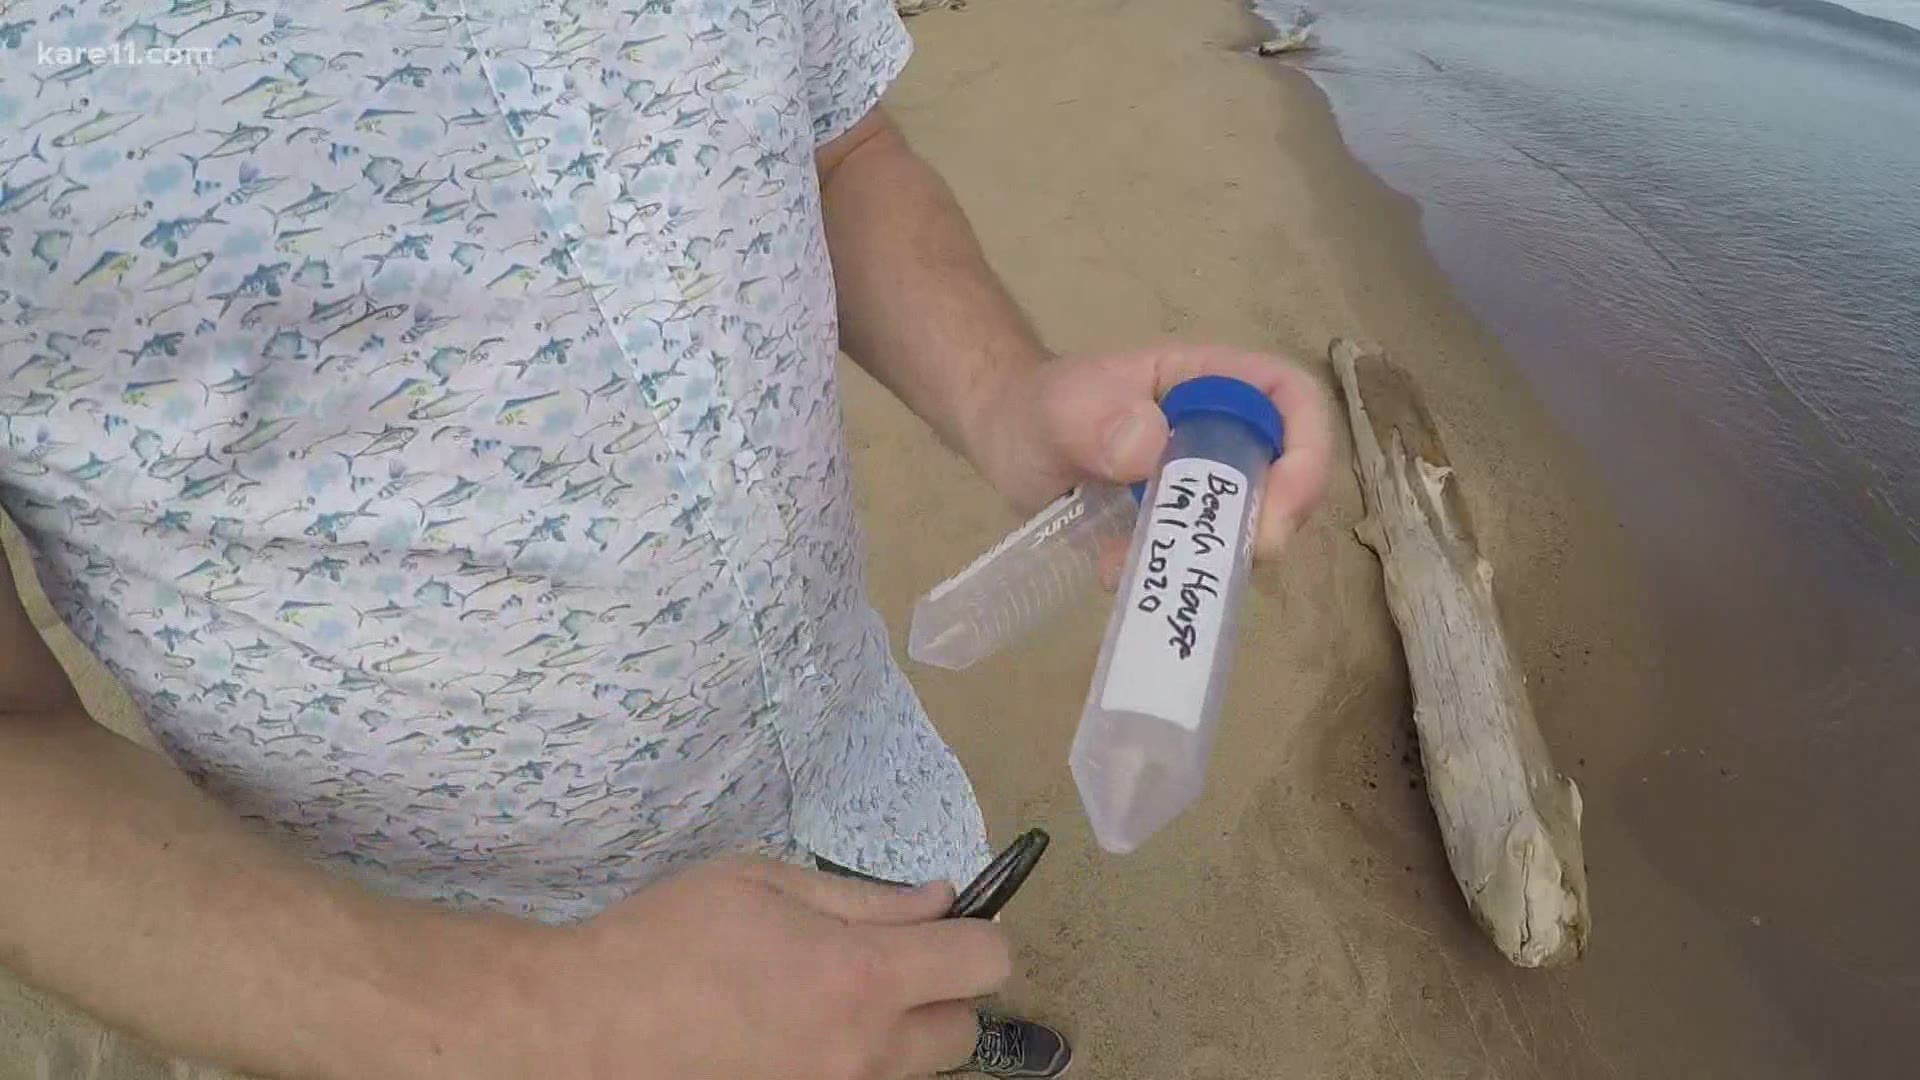 Researchers say so far SARS-CoV-2 has not been found in any of the samples, but the research could be used as a tool to monitor community infection among beachgoers.